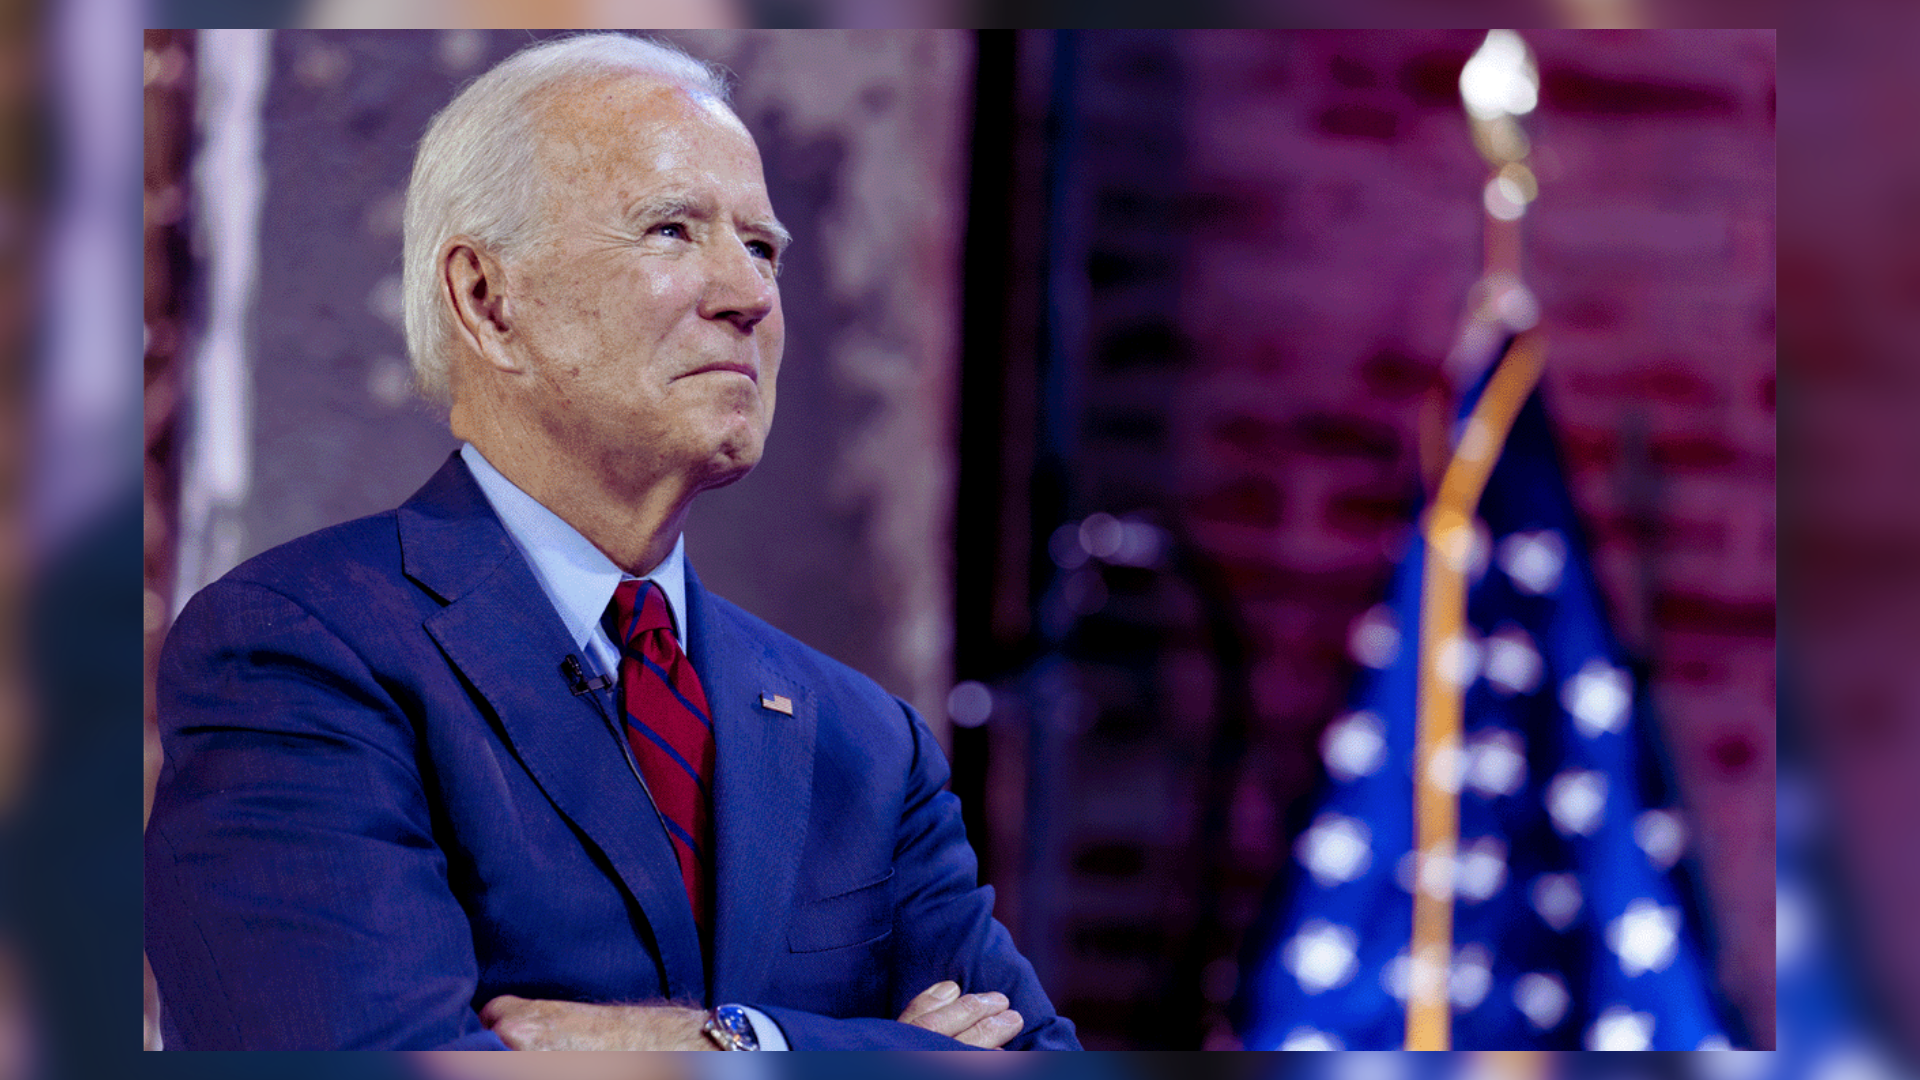 SCOTUS Slams Allegation: Biden Admin Cleared Of Claims Of Coercing Social Media Content Removal